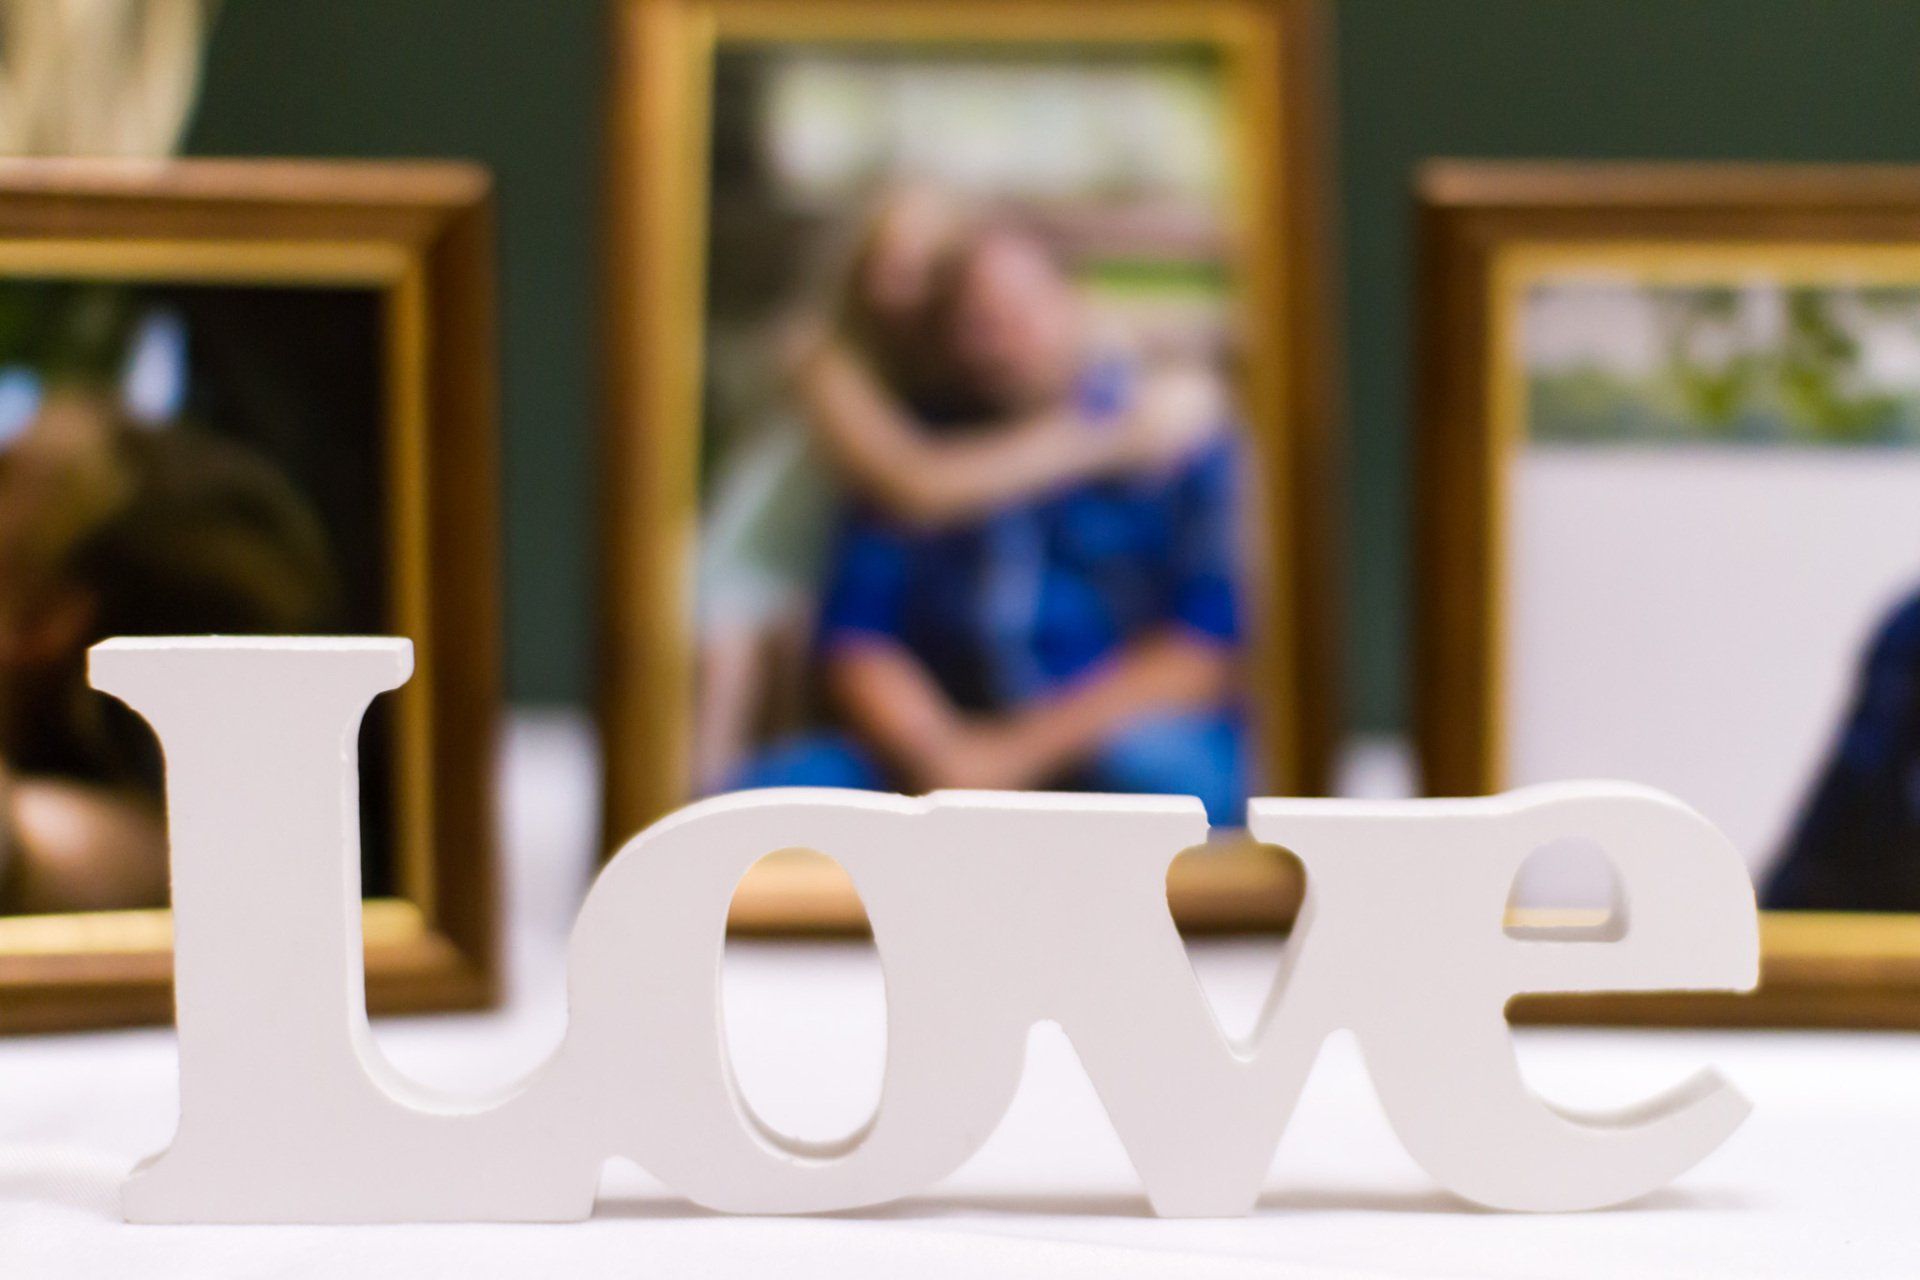 A photo of white letters spelling love with photographs in the background